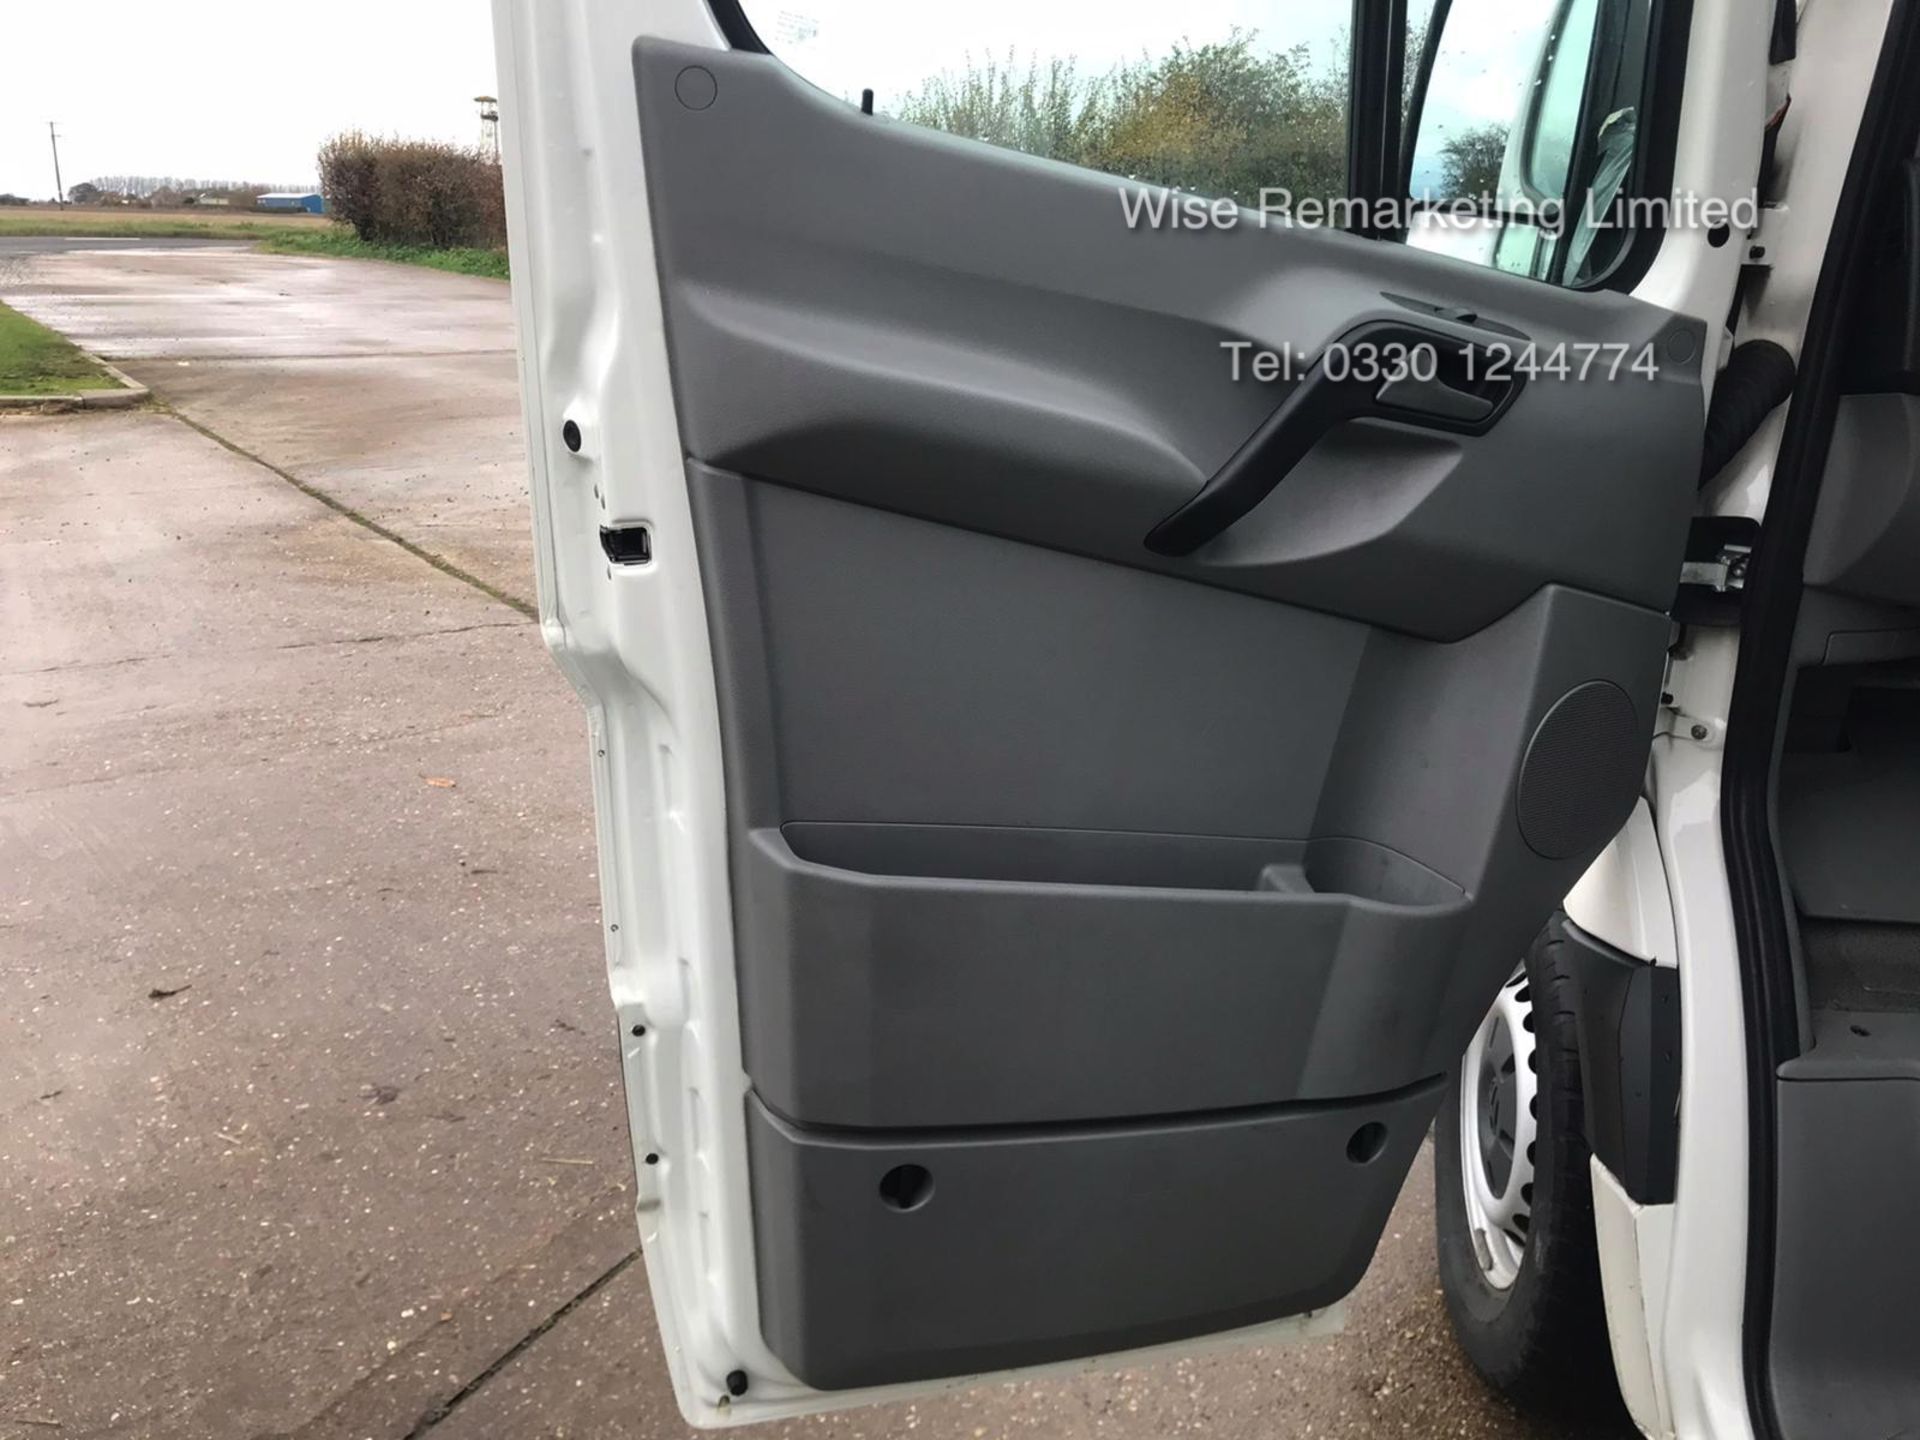 Volkswagen Crafter CR35 Startline 2.0l TDi - LWB - 2016 Model -1 Keeper From New - Service History - Image 11 of 15